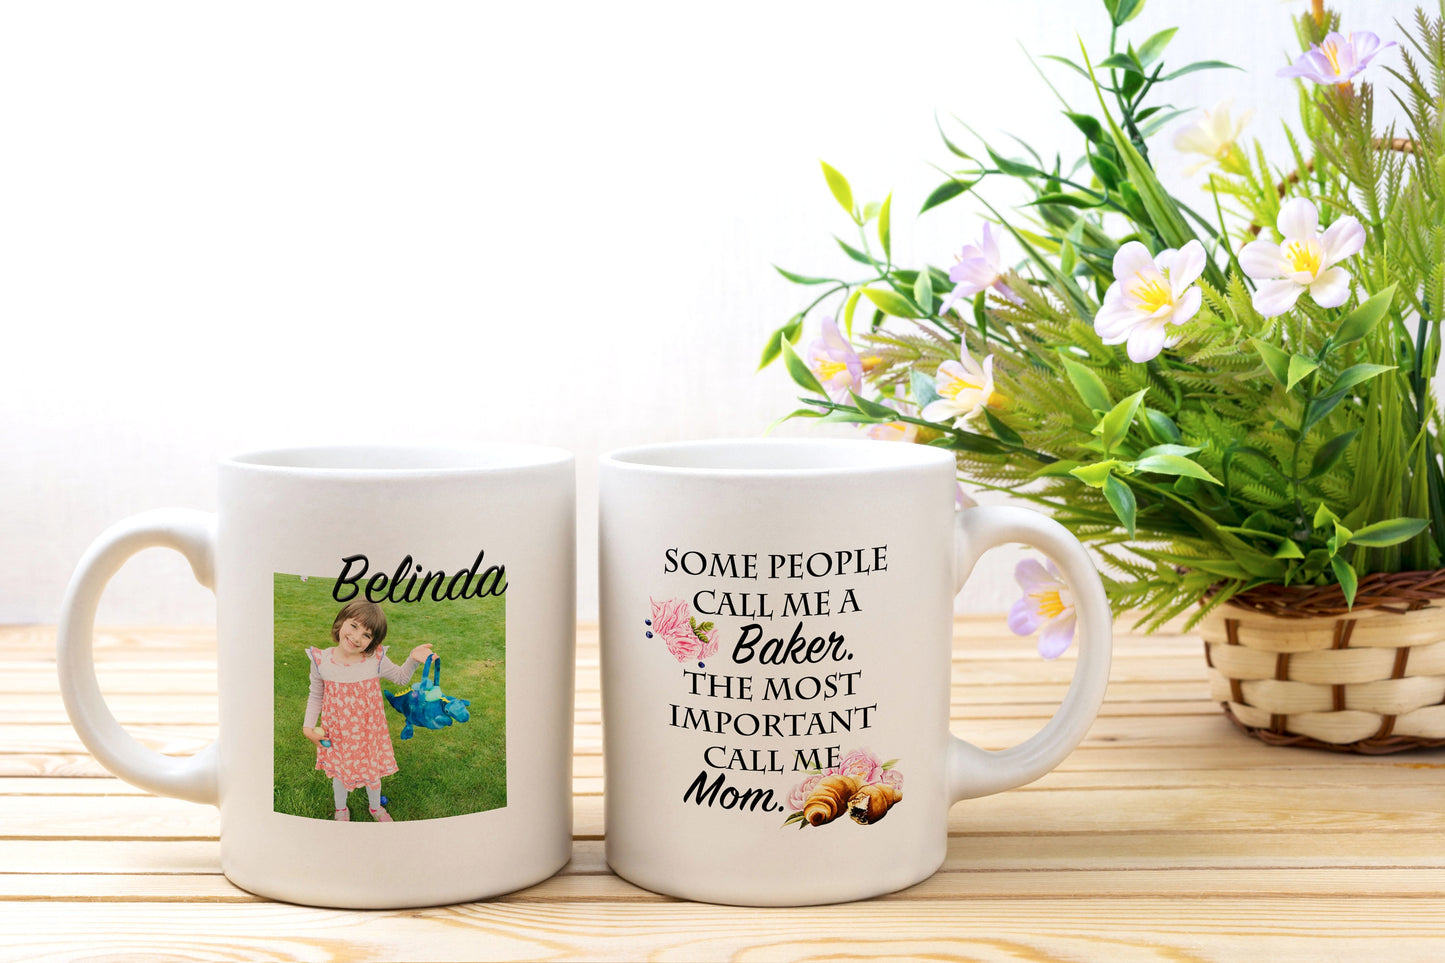 Personalise This is Us Gift for Family, Custom Ceramic Mug Set,  Personalize Mug Family Gift - 3 pieces +